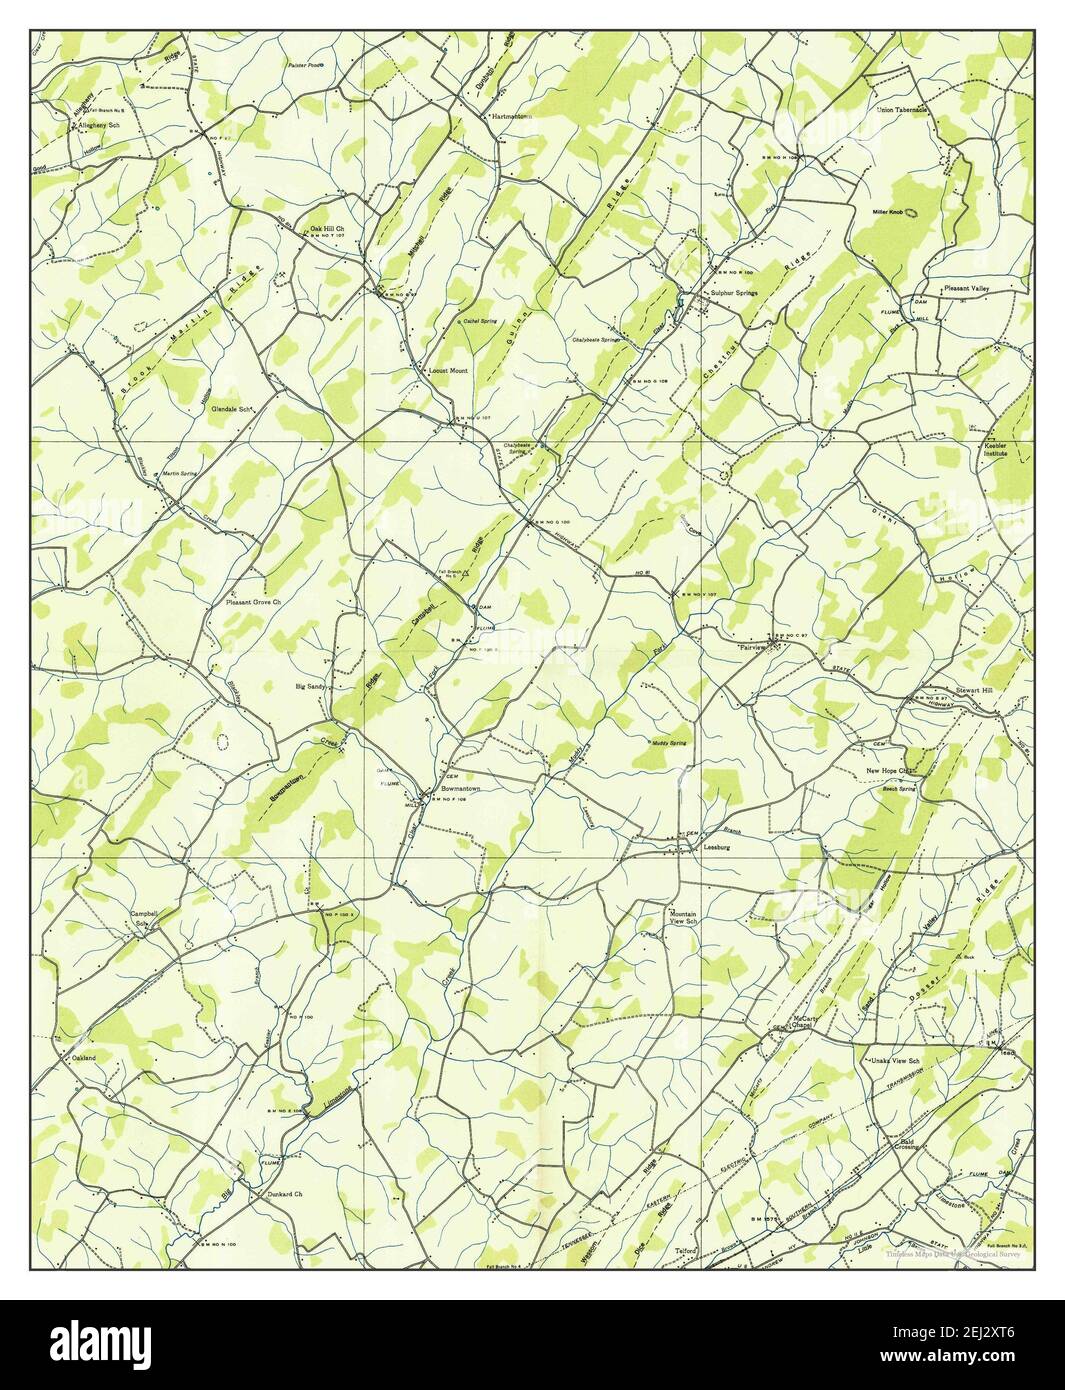 Leesburg, Tennessee, map 1935, 1:24000, United States of America by Timeless Maps, data U.S. Geological Survey Stock Photo